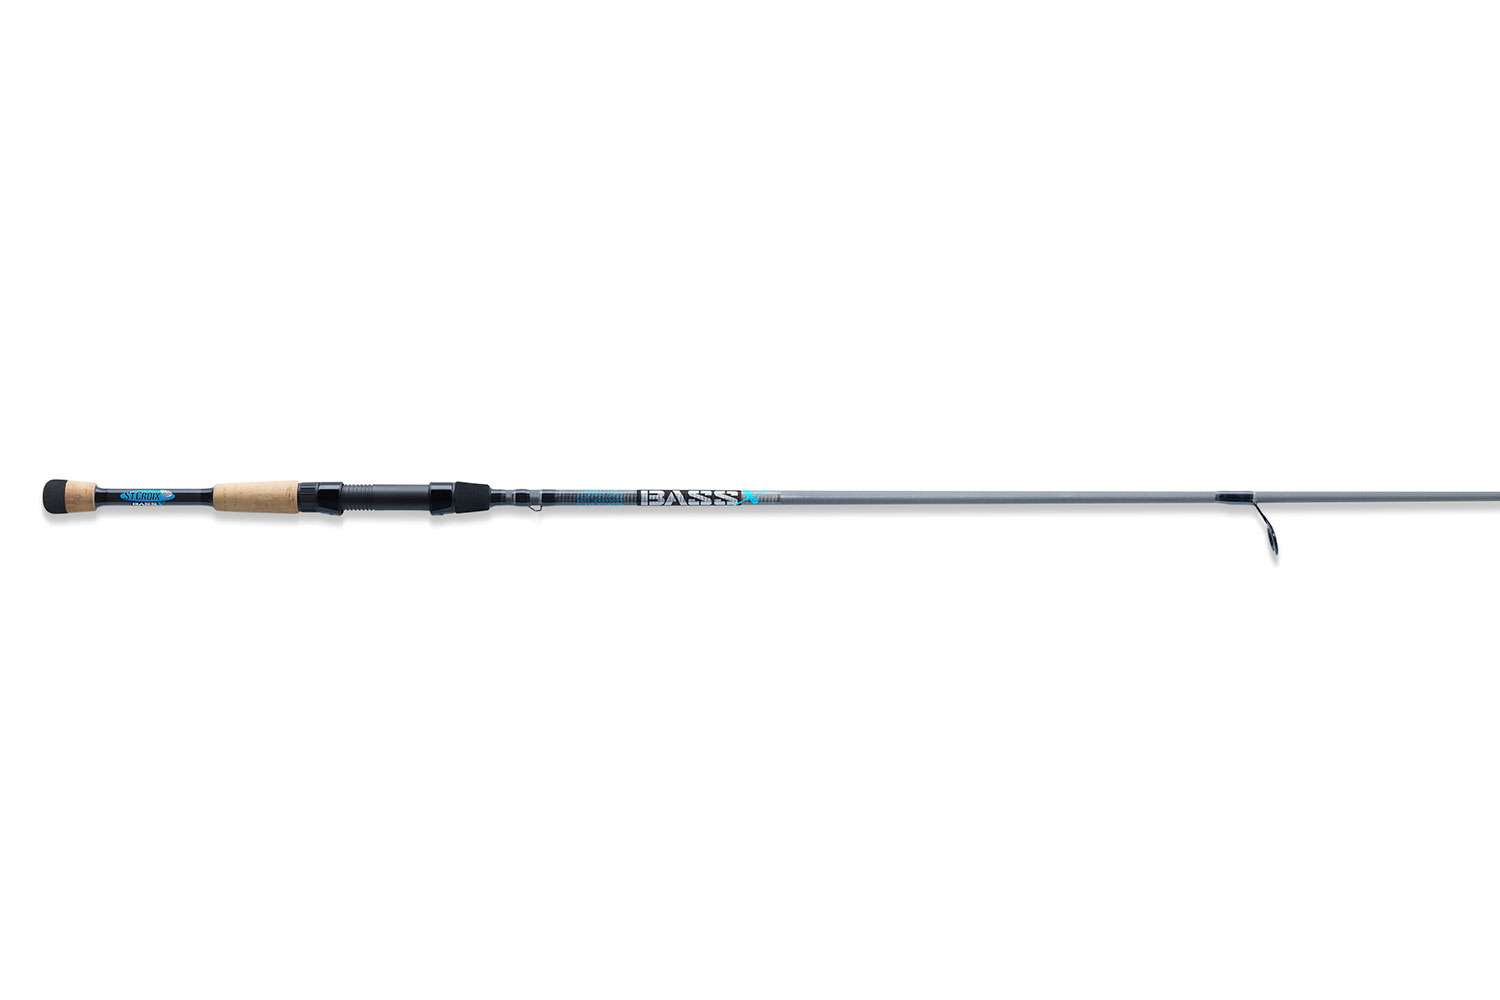 Rapala Enigma Spinning Fishing Rod and Reel Combo, Medium, 6.6-ft, 2-pc